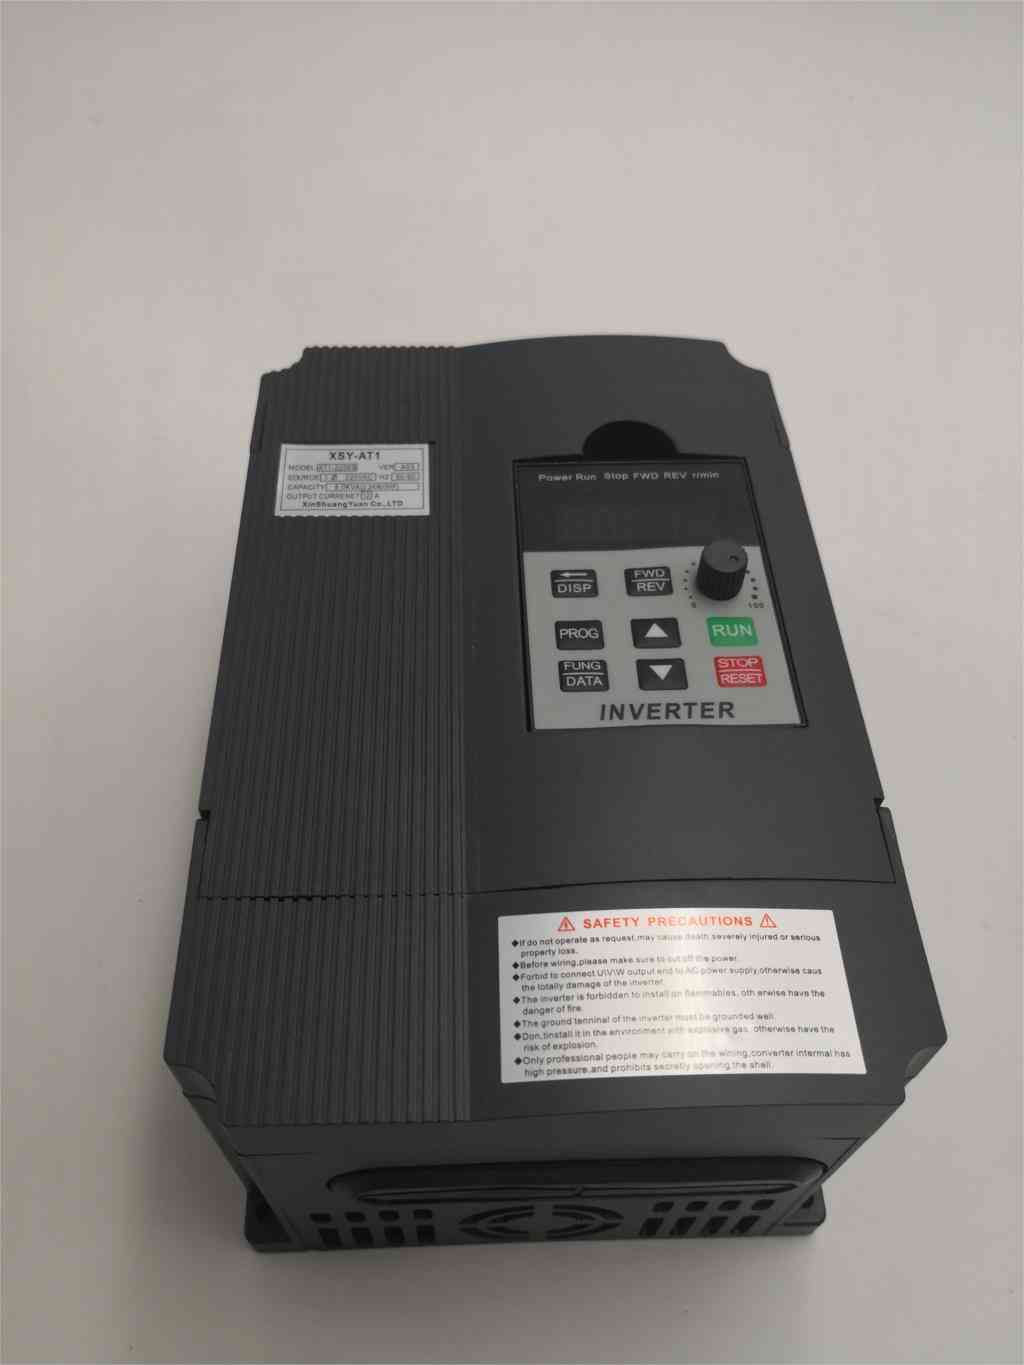 Vfd 1.5kw/2.2kw/4kw Inverter, Xsy-at1, Frequency Converter, Single-phase Input And 3-220v Output Motor Speed Controller